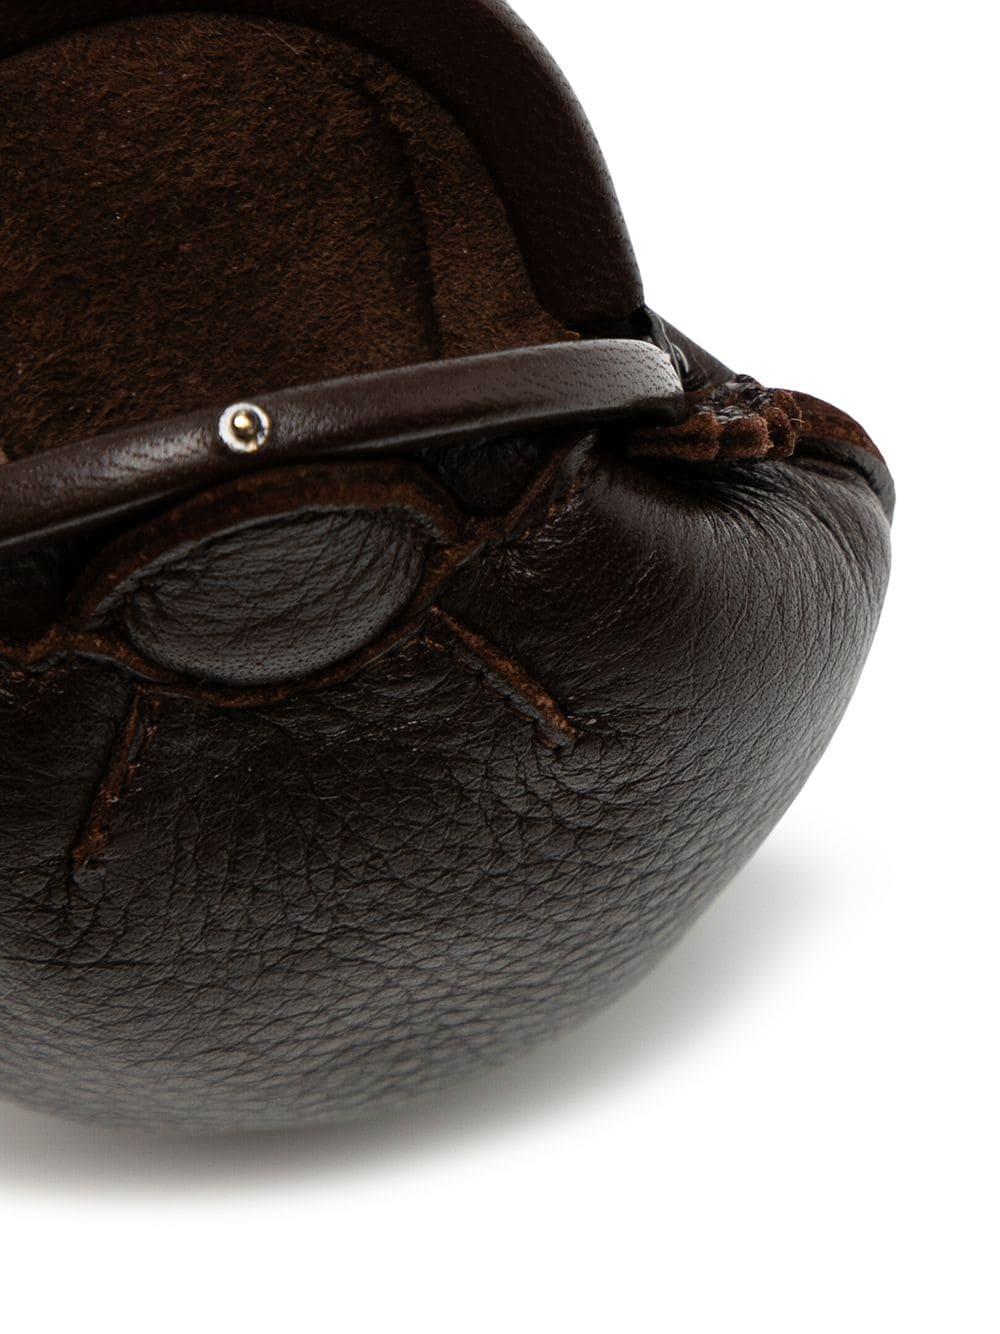 Designed in an adorable turtle silhouette, this pre-owned Bottega Veneta coin purse features a kiss logo with engraved brand initials, inside a suede-lined interior and structured internal padding to maintain the shape. It compact size makes this